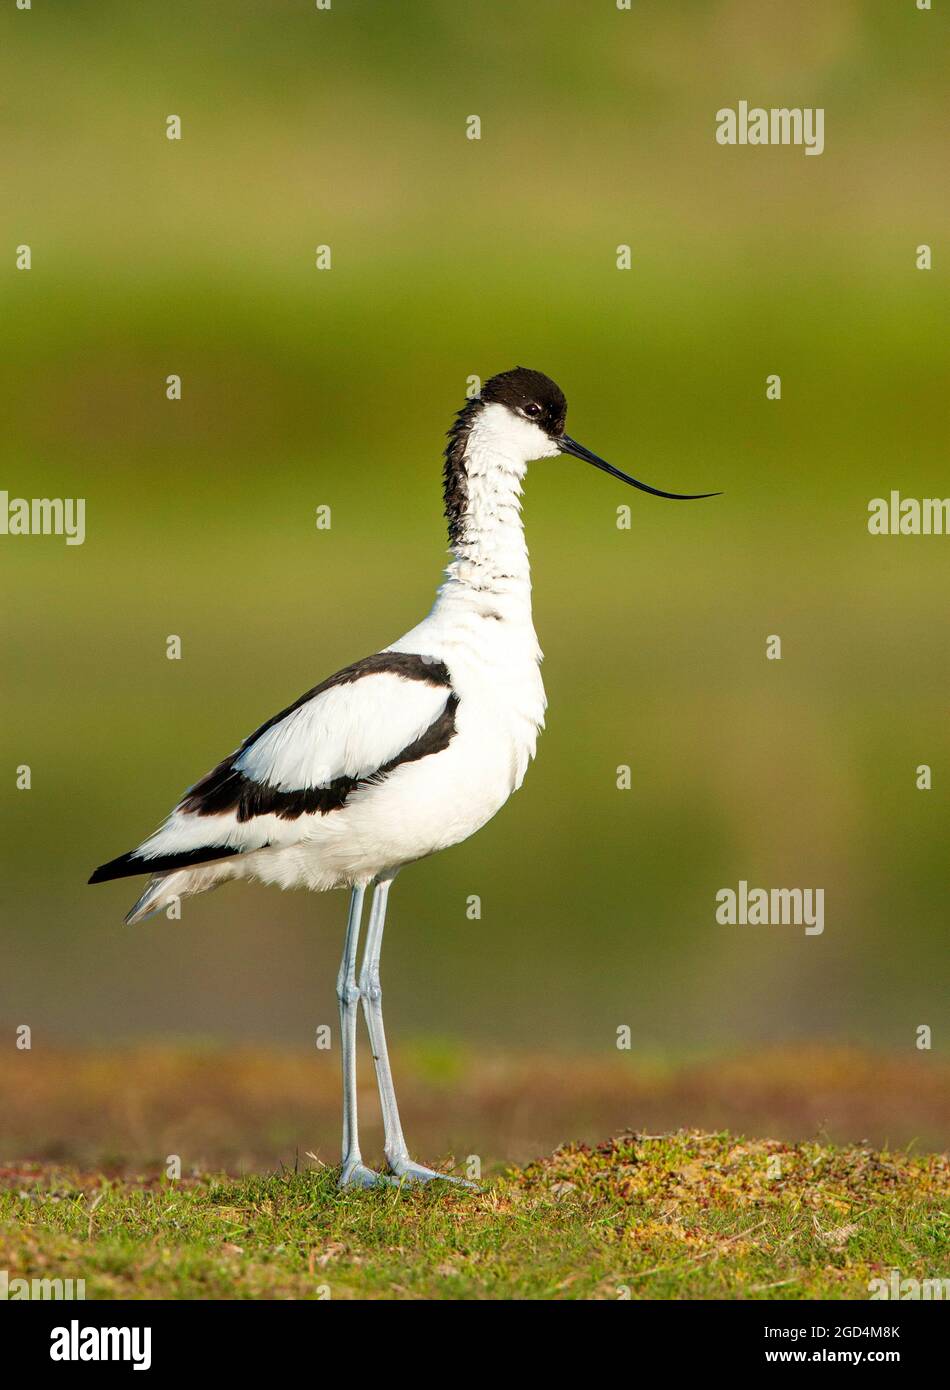 Pied Avocet (Recurvirostra avosetta) adult perched on gras with green background Stock Photo